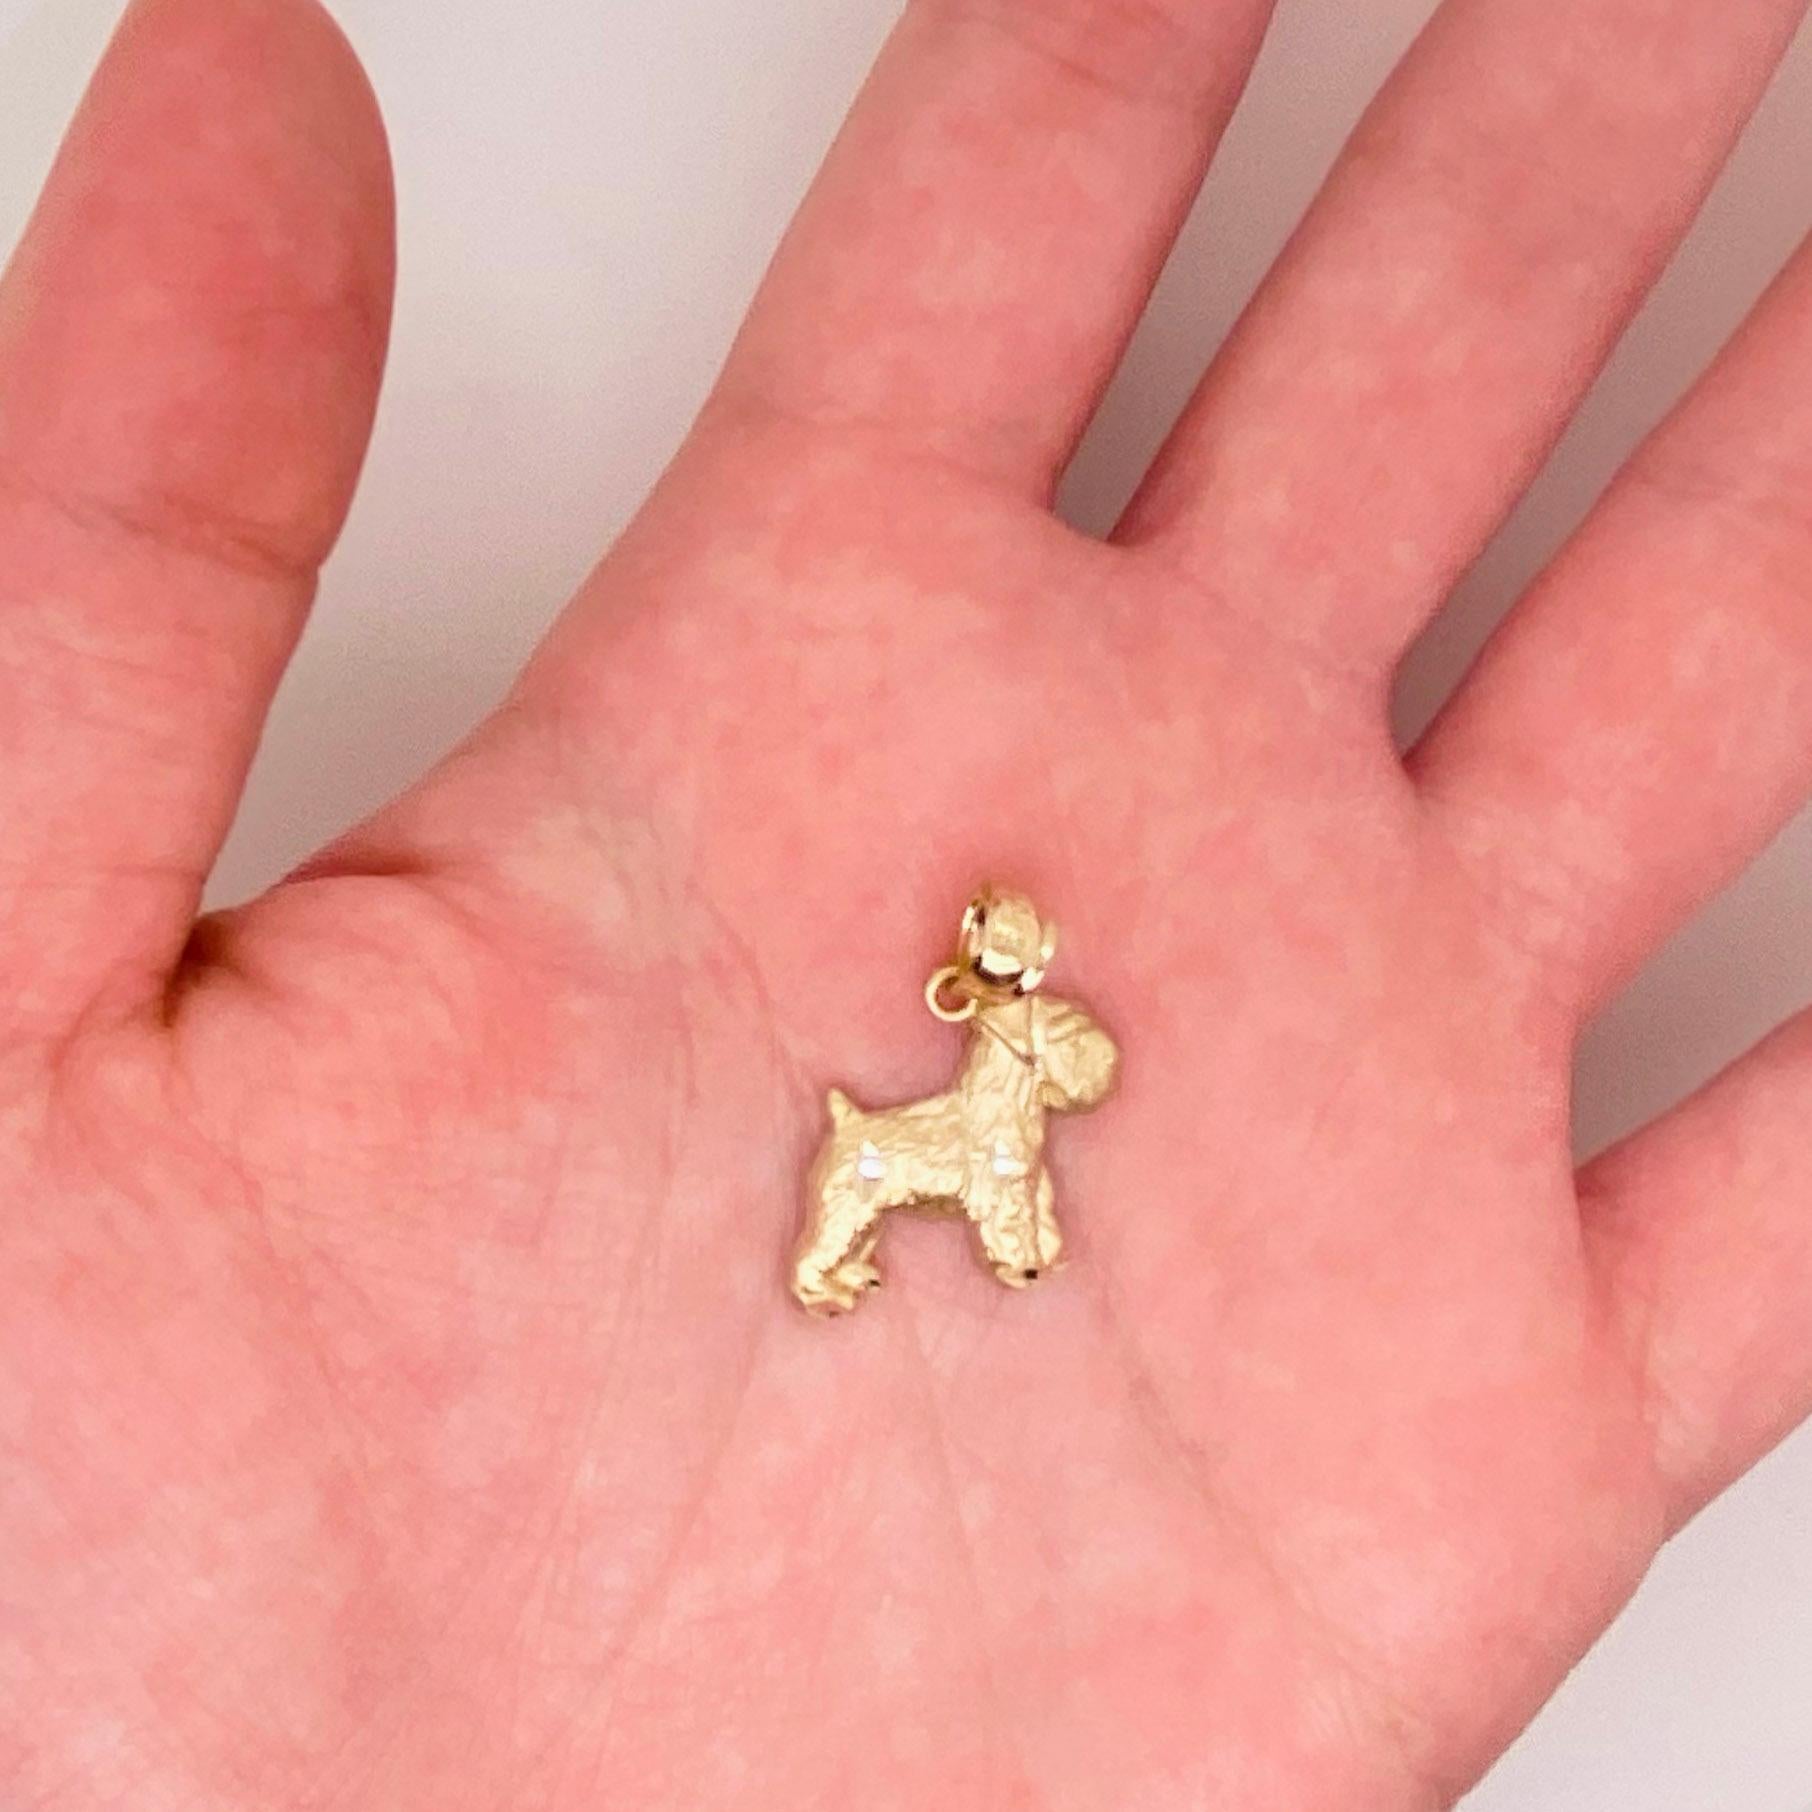 This adorable 14 karat gold schnauzer pendant is absolutely adorable! Germany’s entry in the quest for an ideal farm dog was the breed that would come to be known as the Schnauzer. During the birth of Europe’s organized show scene in the 1870s, the